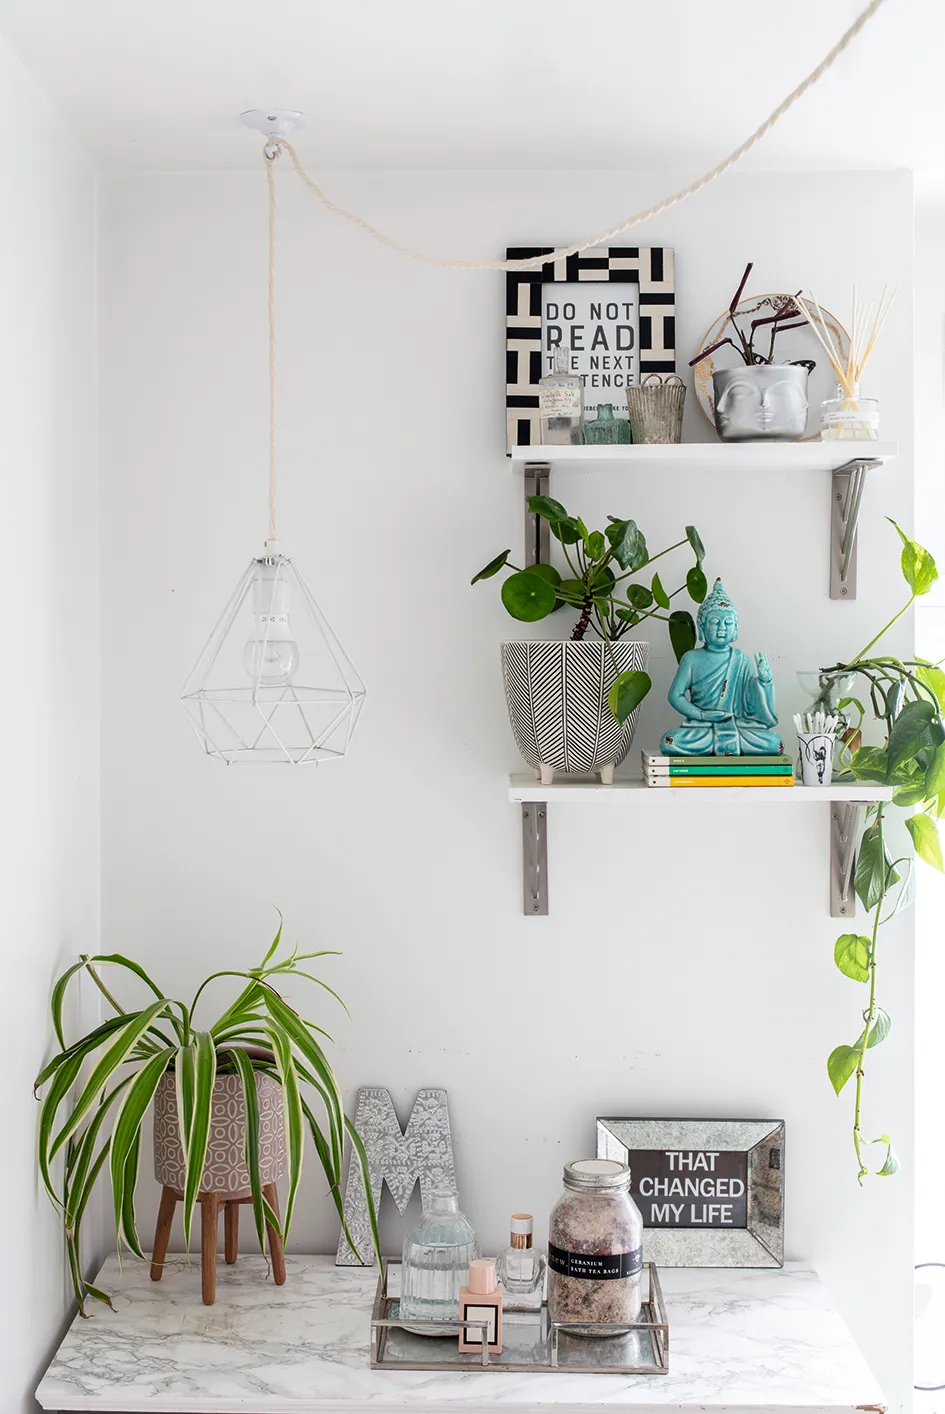 Wall shelves by Dowsing & Reynolds make for a pretty display space. Filled with plants, artwork, candles and accessories, they help to add character to the bathroom